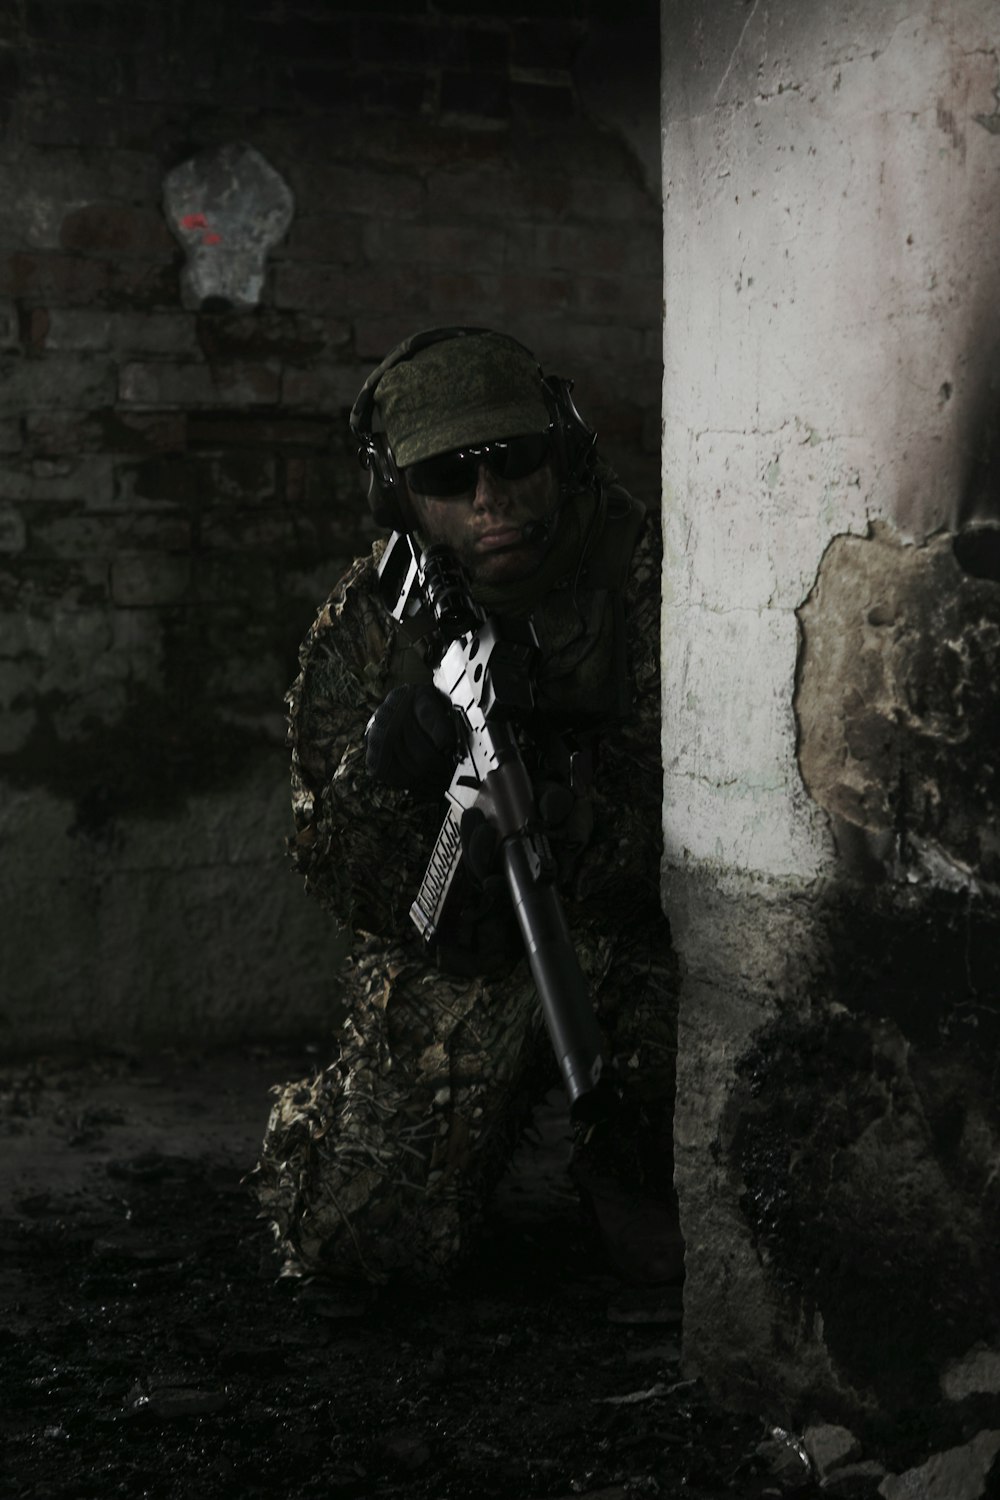 military personal in camouflage carrying rifle